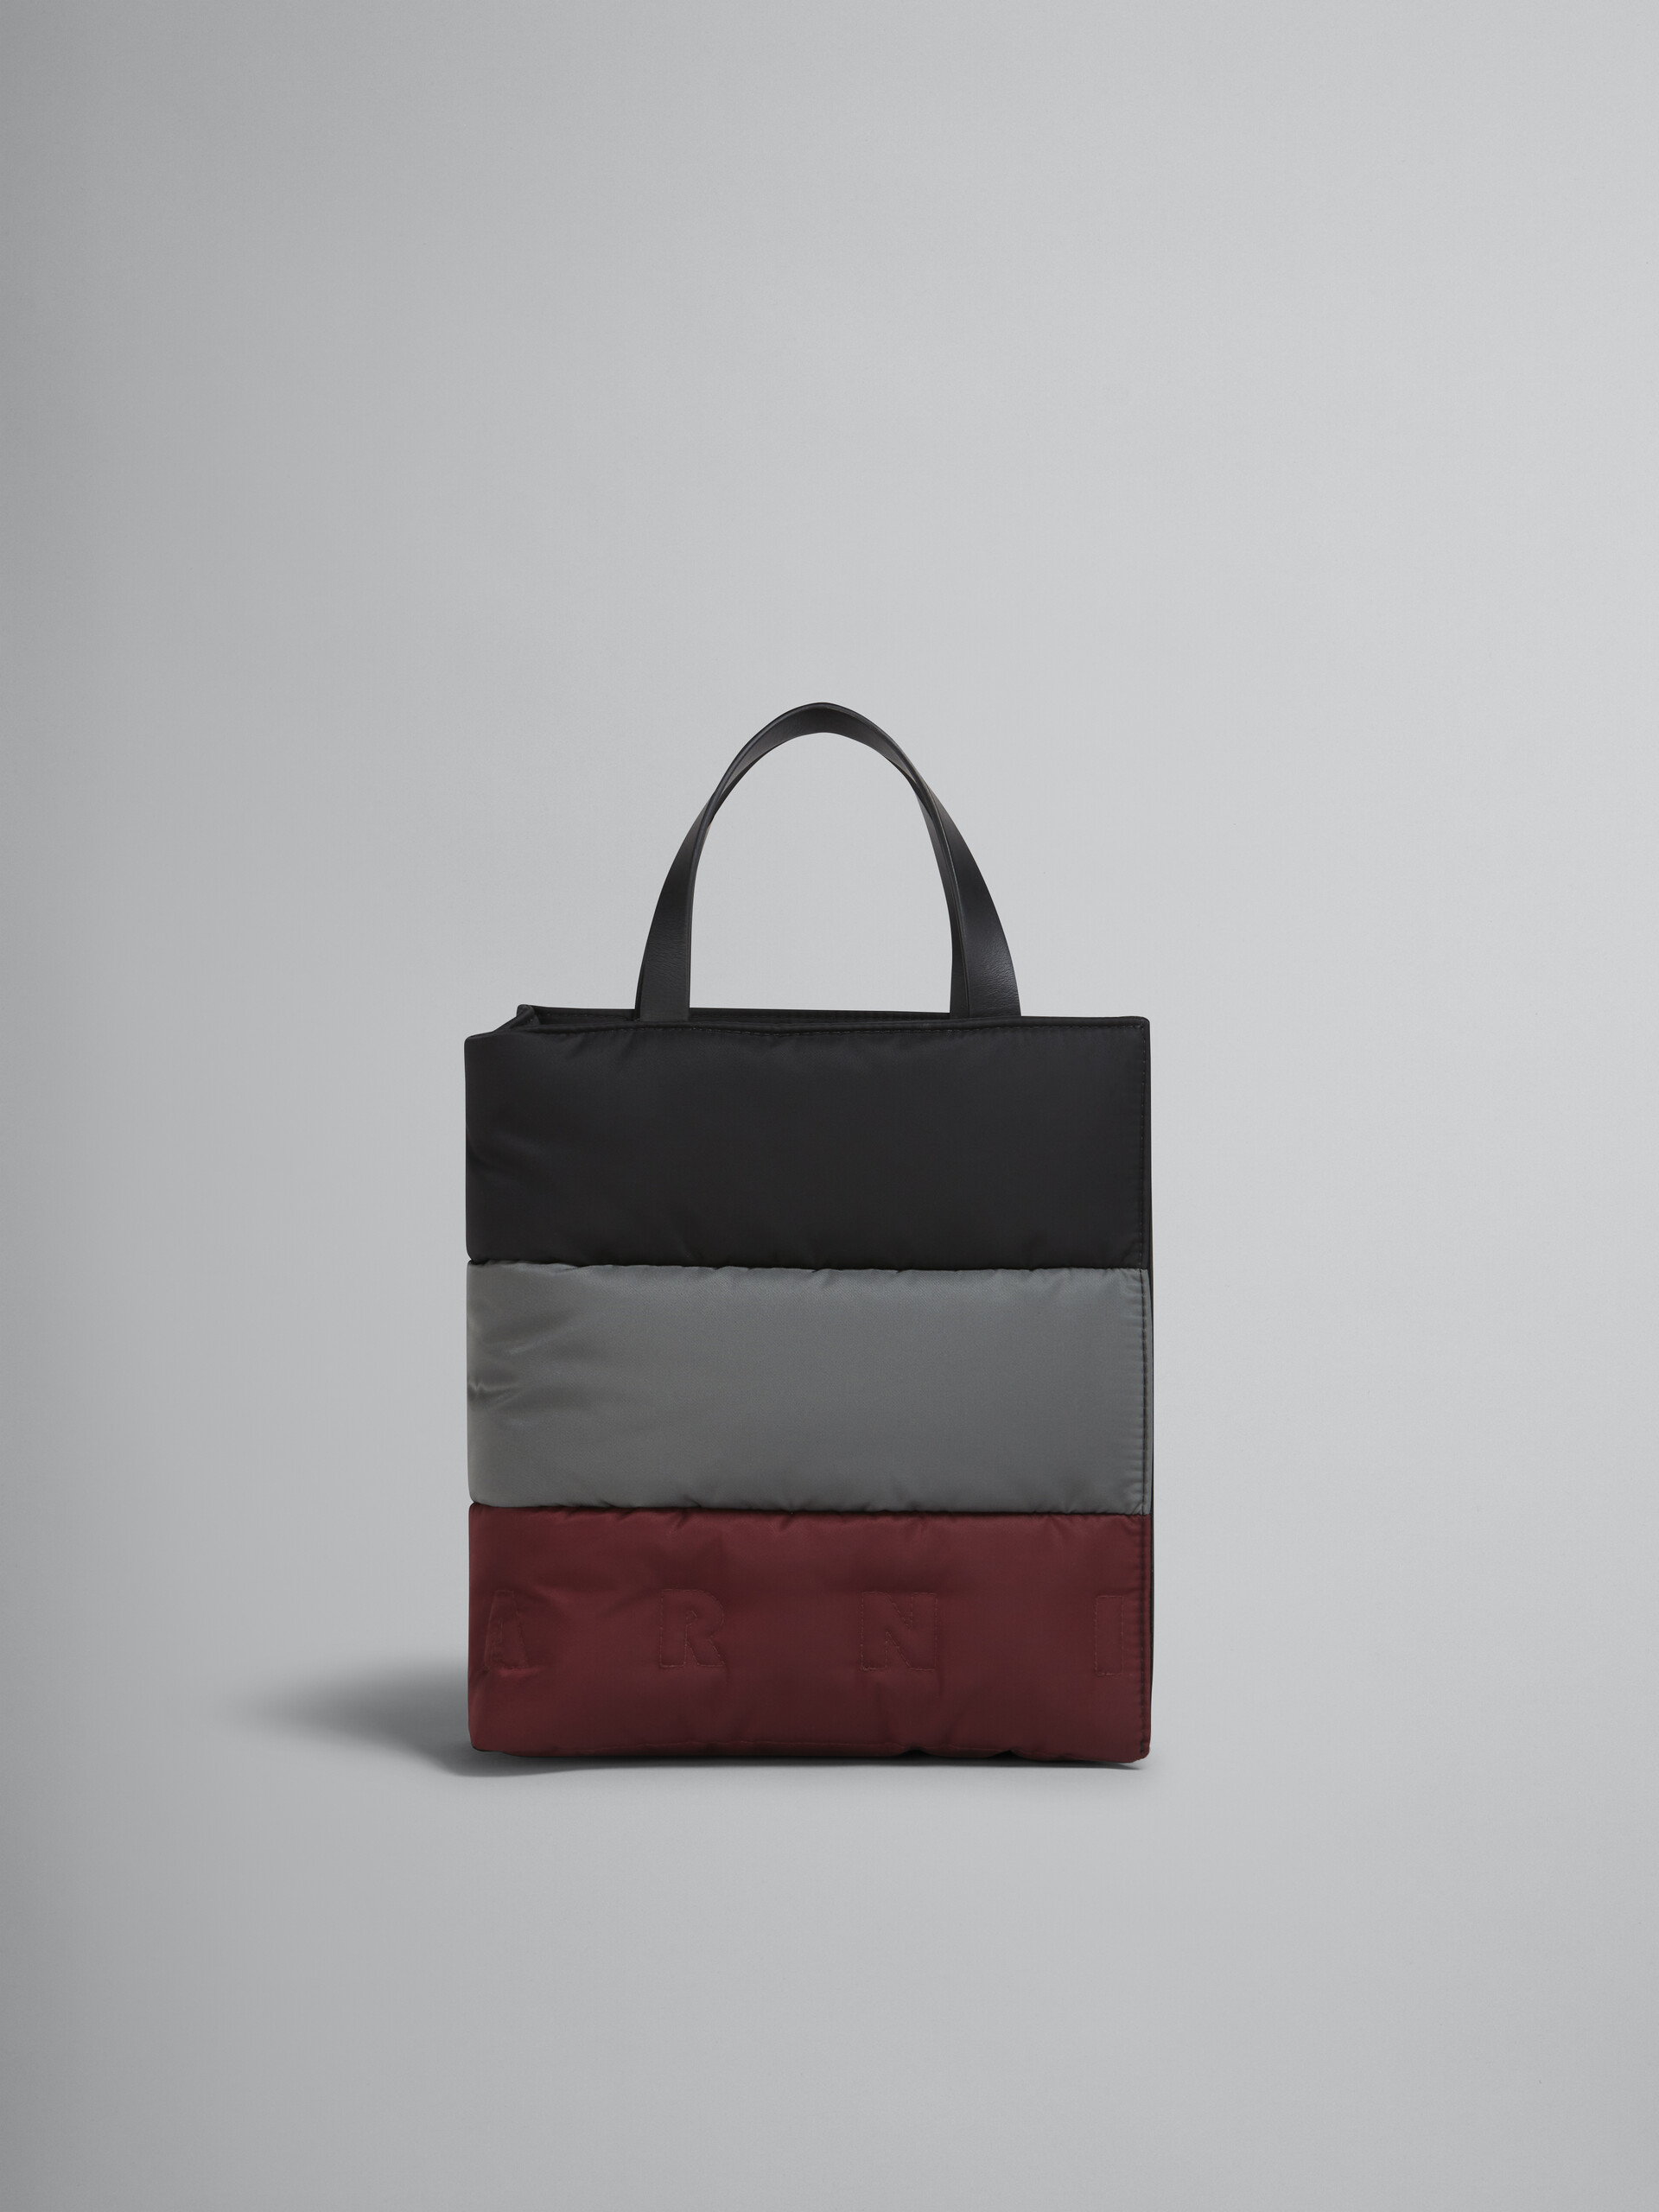 MUSEO SOFT small bag in tri-coloured nylon - Shopping Bags - Image 1